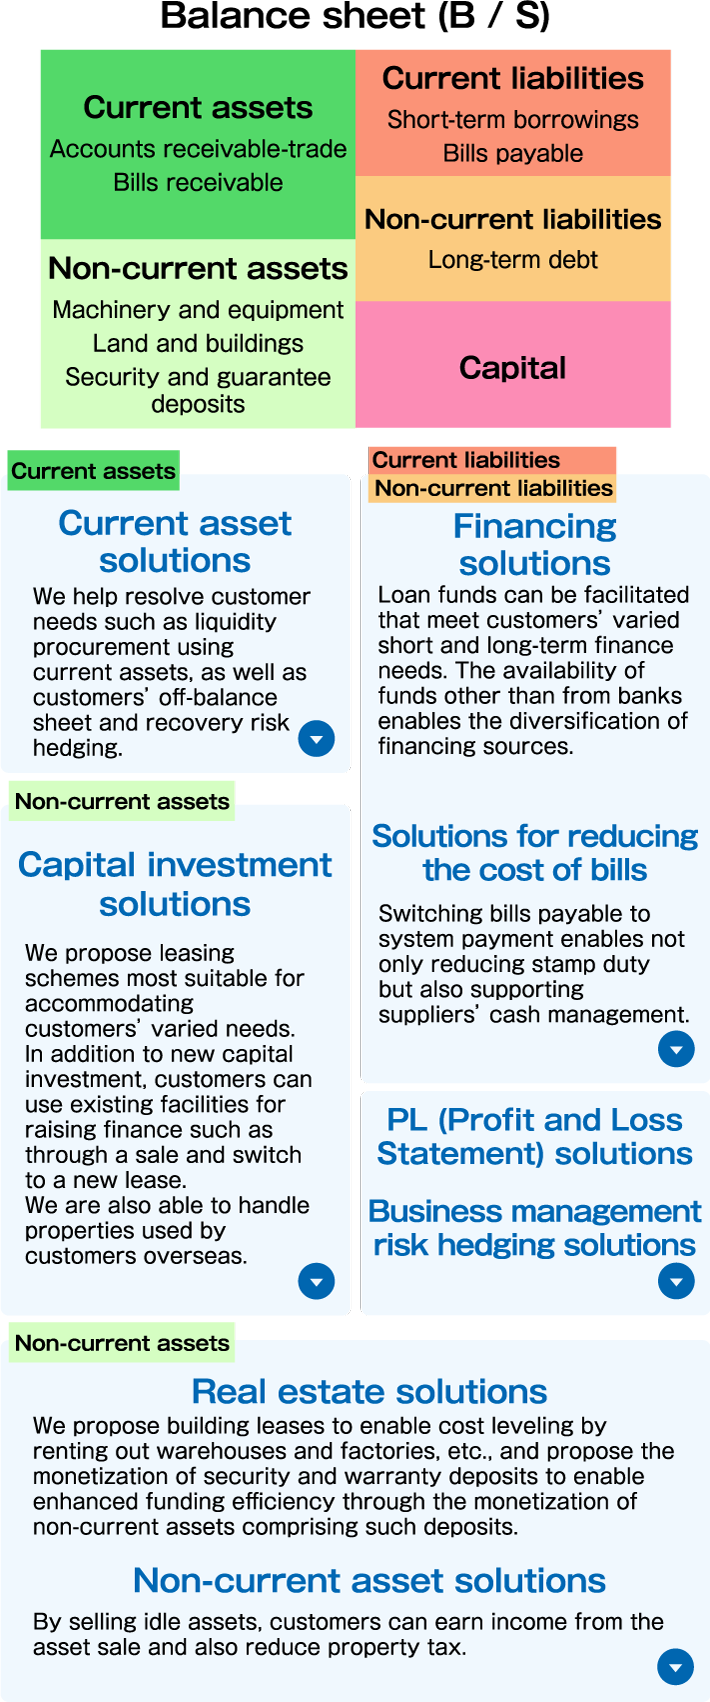 Liquid Asset Solution We also meet the needs of fund procurement utilizing liquid assets and hedging of off-balance sheet and collection risk. Capital investment solution We propose the optimal leasing scheme to meet various needs. In addition to new capital investment, you can sell existing equipment and switch to a new lease to use it for financing. In addition, we can handle properties used overseas. Real estate solution Leasing buildings such as warehouses and factories for building building leases that equalize costs and liquidating fixed assets such as security deposits and security deposits, which can improve cash efficiency. We will propose Fixed asset solution By selling idle assets, you can earn income from the sale and reduce fixed asset tax. Financing solution We can provide financing to meet various funding needs. Having funding sources other than banks enables diversification of funding sources. Bill Cost Reduction Solution By switching bills payable to system payments, not only the stamp duty will be reduced, but also the financing business of the supplier company can be supported. PL (income statement) solution Management risk hedging solution